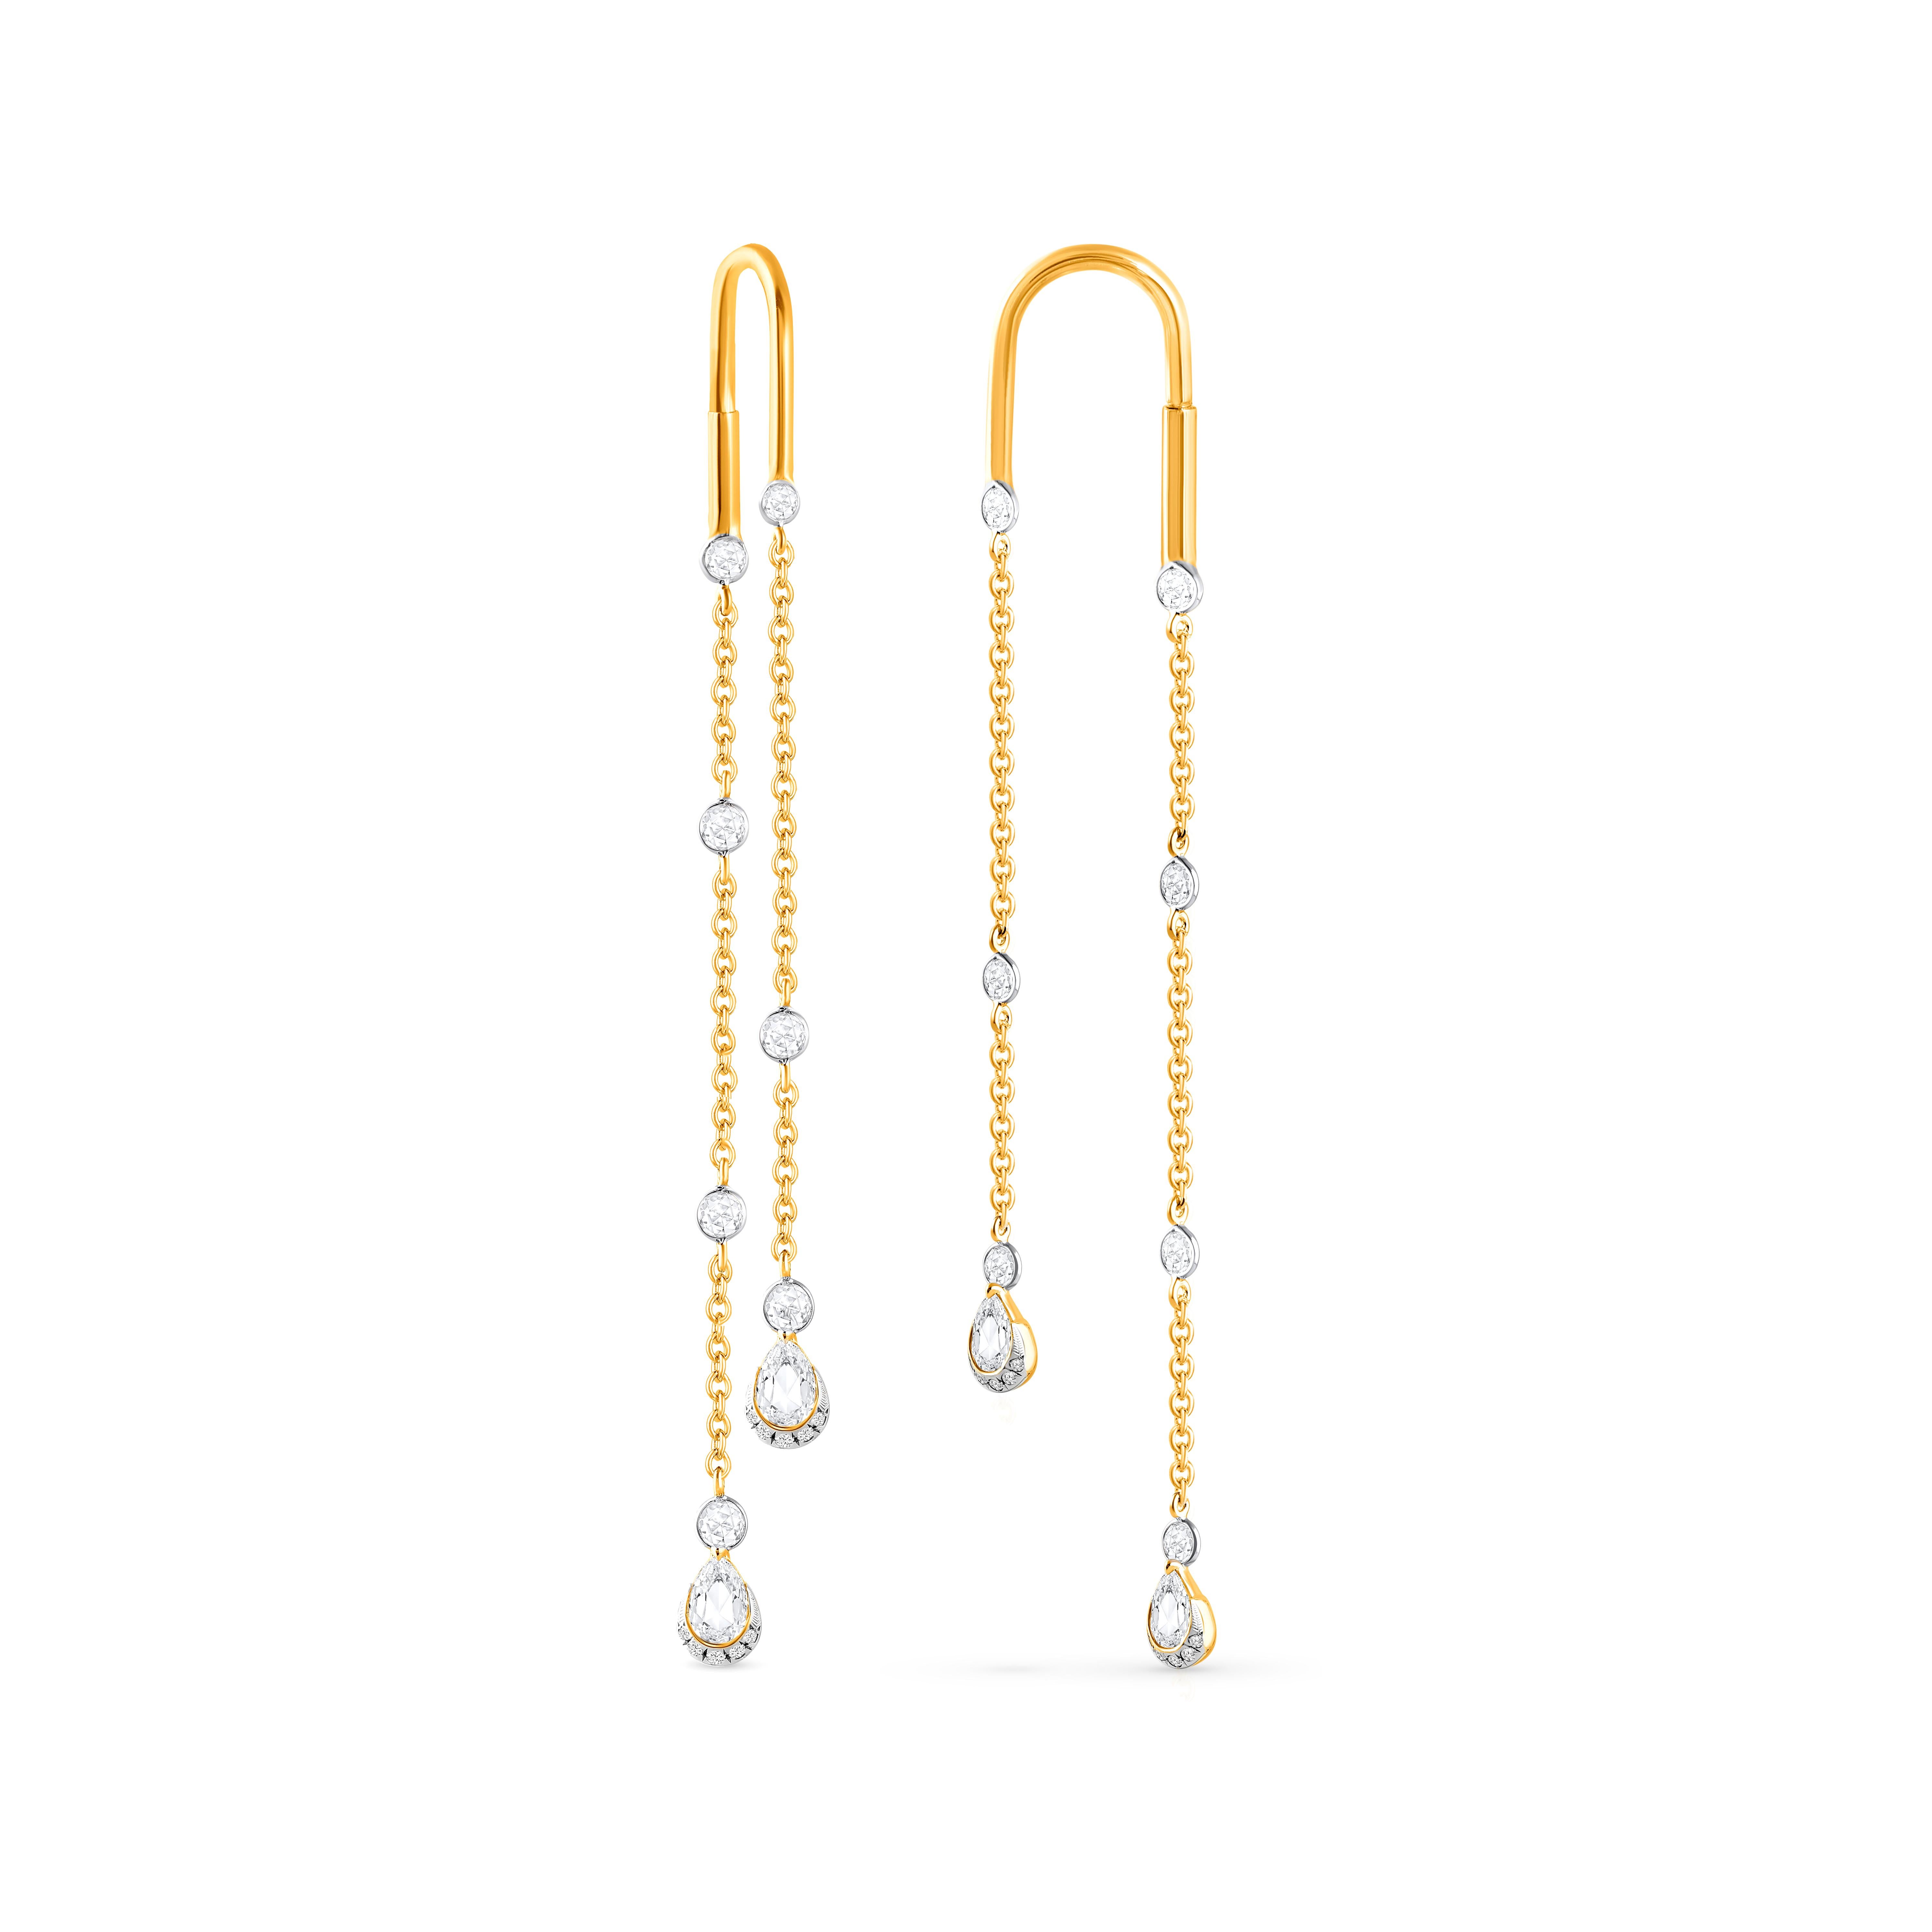 Inspired by the JOY of experiencing a gushing waterfall, these elegantly designed earrings are studded with 7/8 carats natural brilliant and rose cut colorless diamonds in a prong setting and beautifully crafted in 18 carat yellow gold. Our diamonds